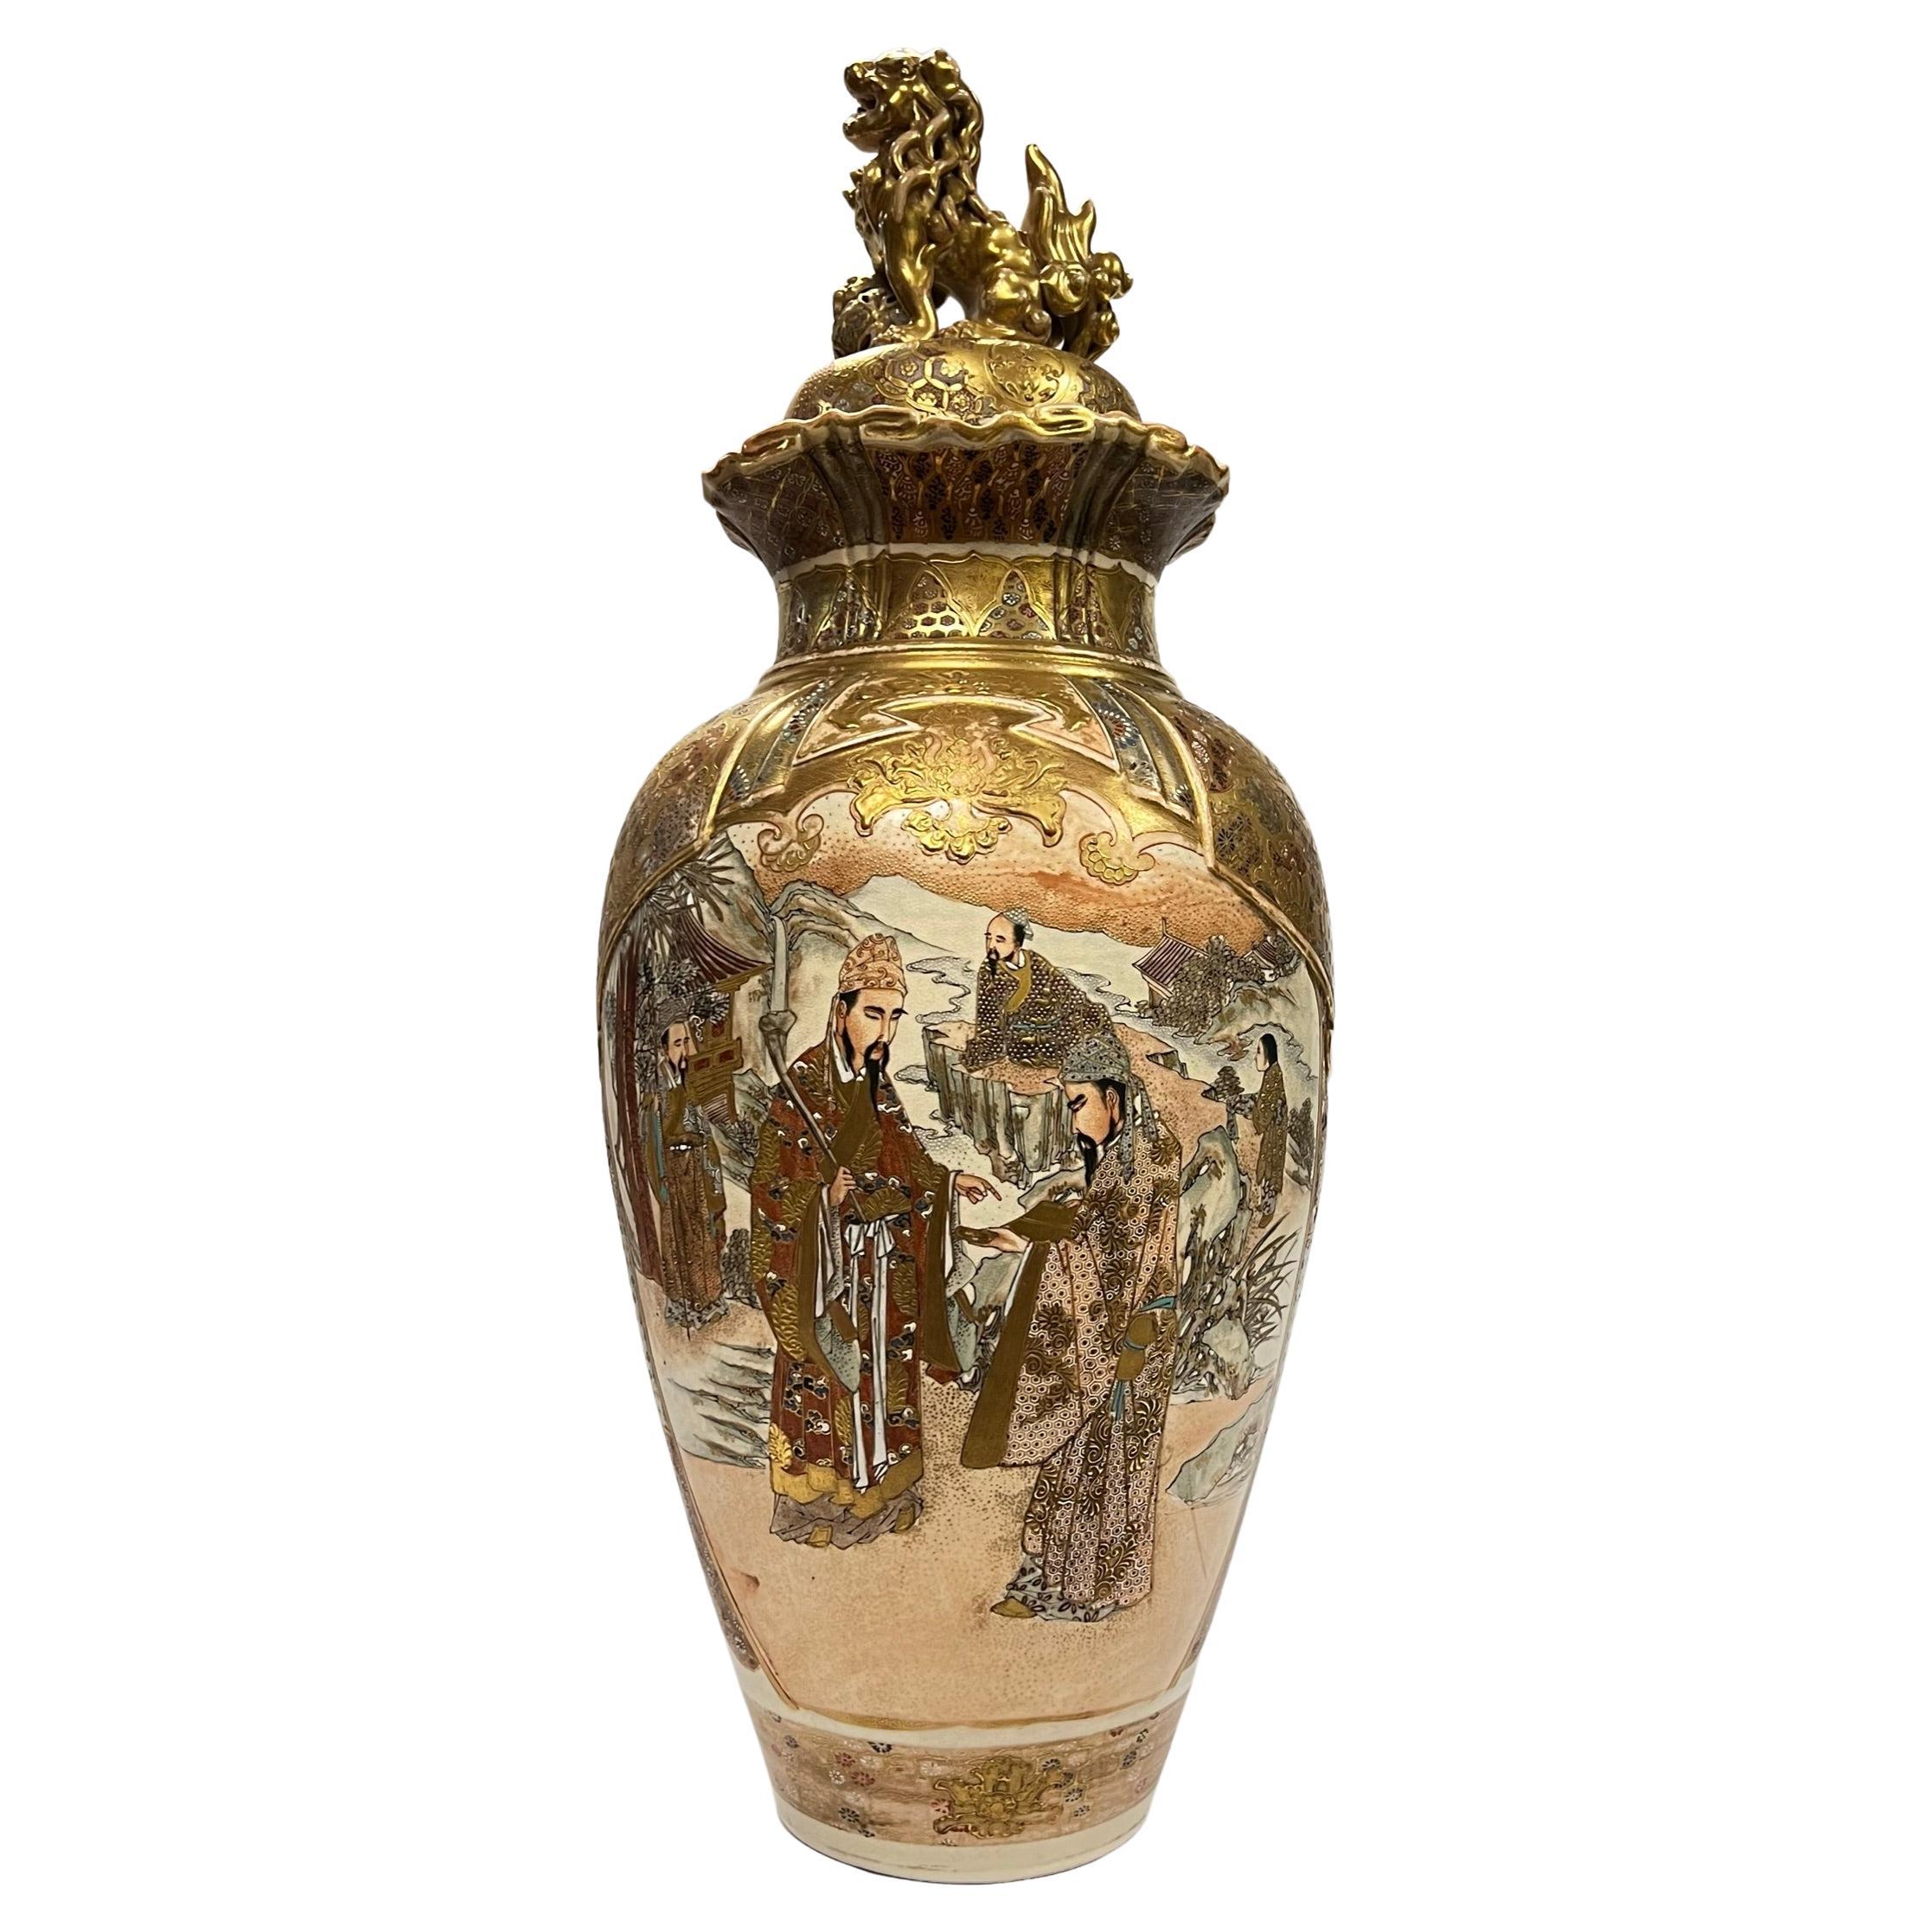 Exceptional Large Satsuma Vase with Cover